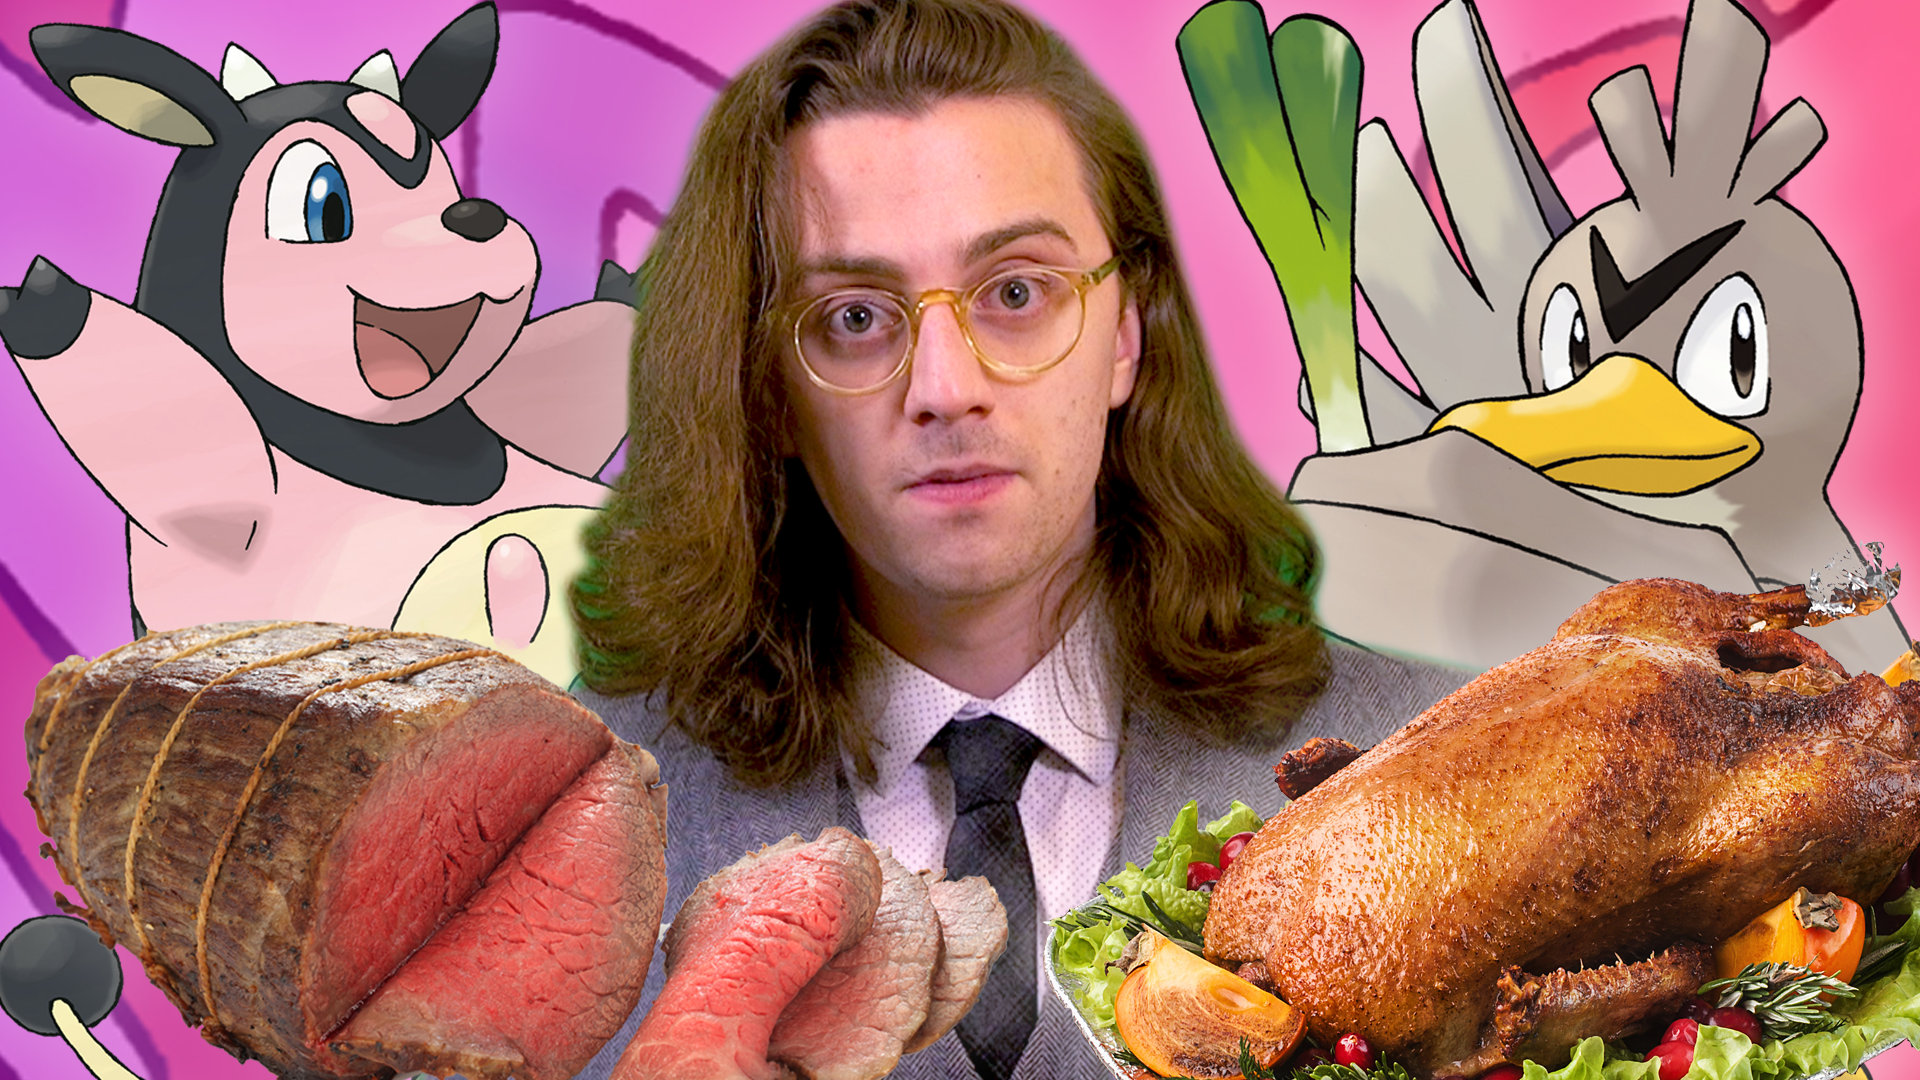 Brian David Gilbert looks dejectedly at the camera. He is surrounded by the Pokémon Miltank and Farfetch’d along with slab of roast beef and a roasted duck.